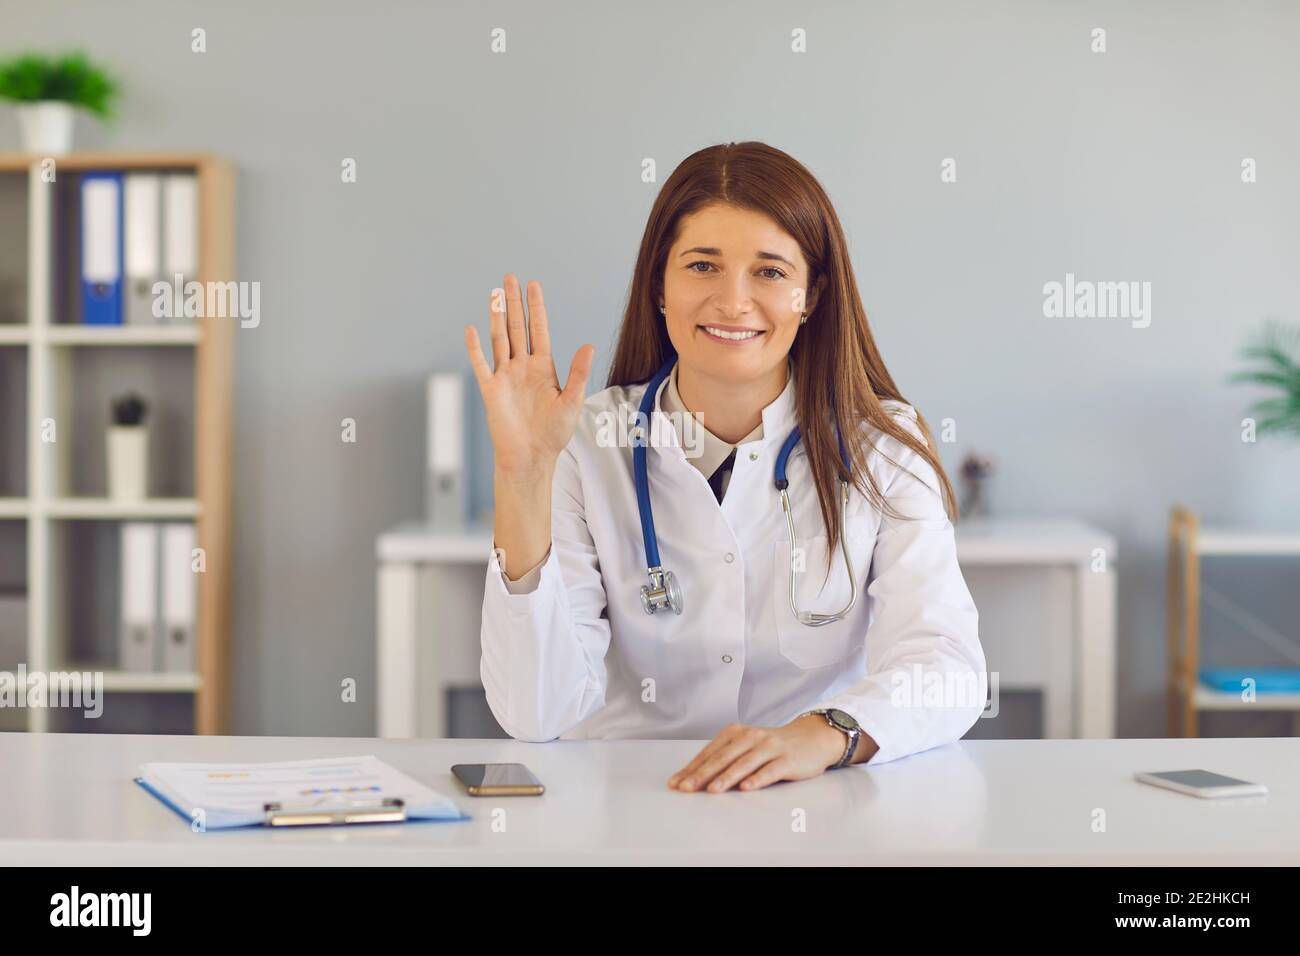 Female doctor waving hand greeting his viewers starting an online broadcast in a hospital office. Stock Photo